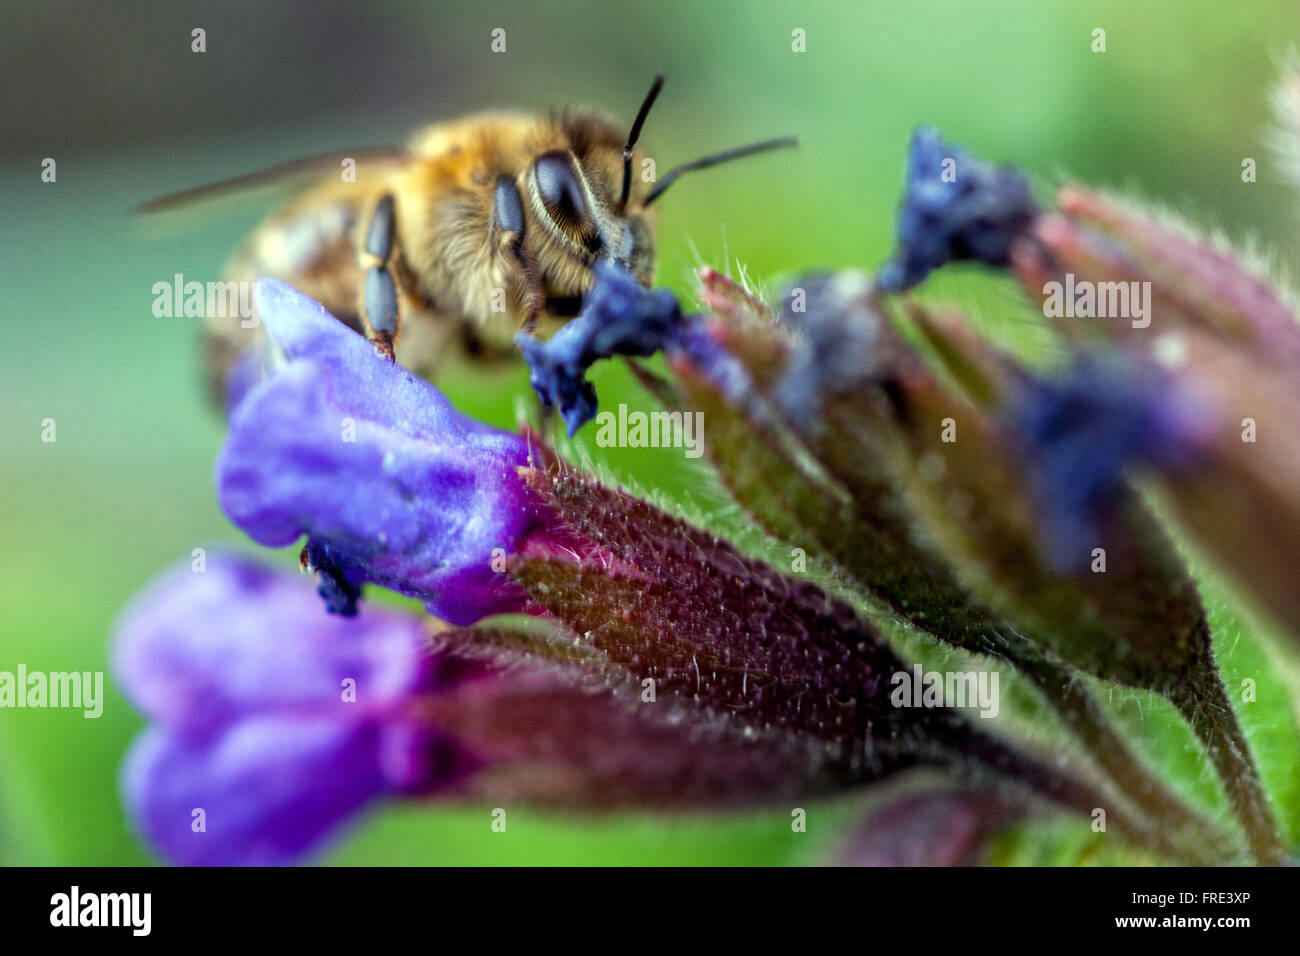 Bee on flower close up, Pulmonaria officinalis, Lungwort blue flower Stock Photo